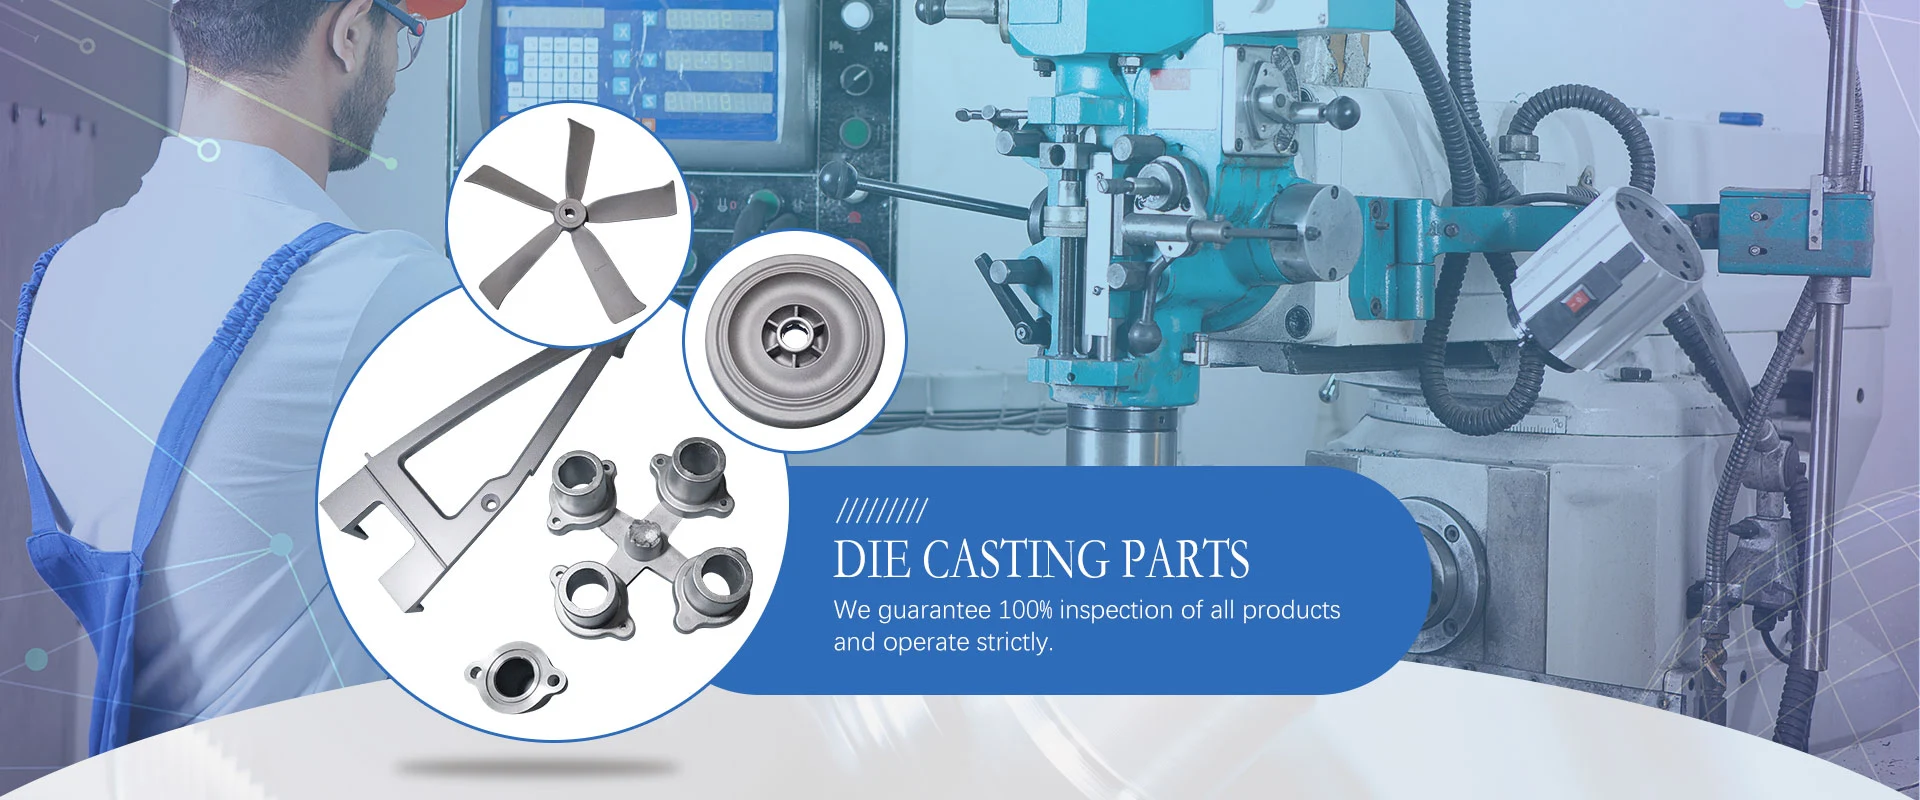 China Die Casting Parts